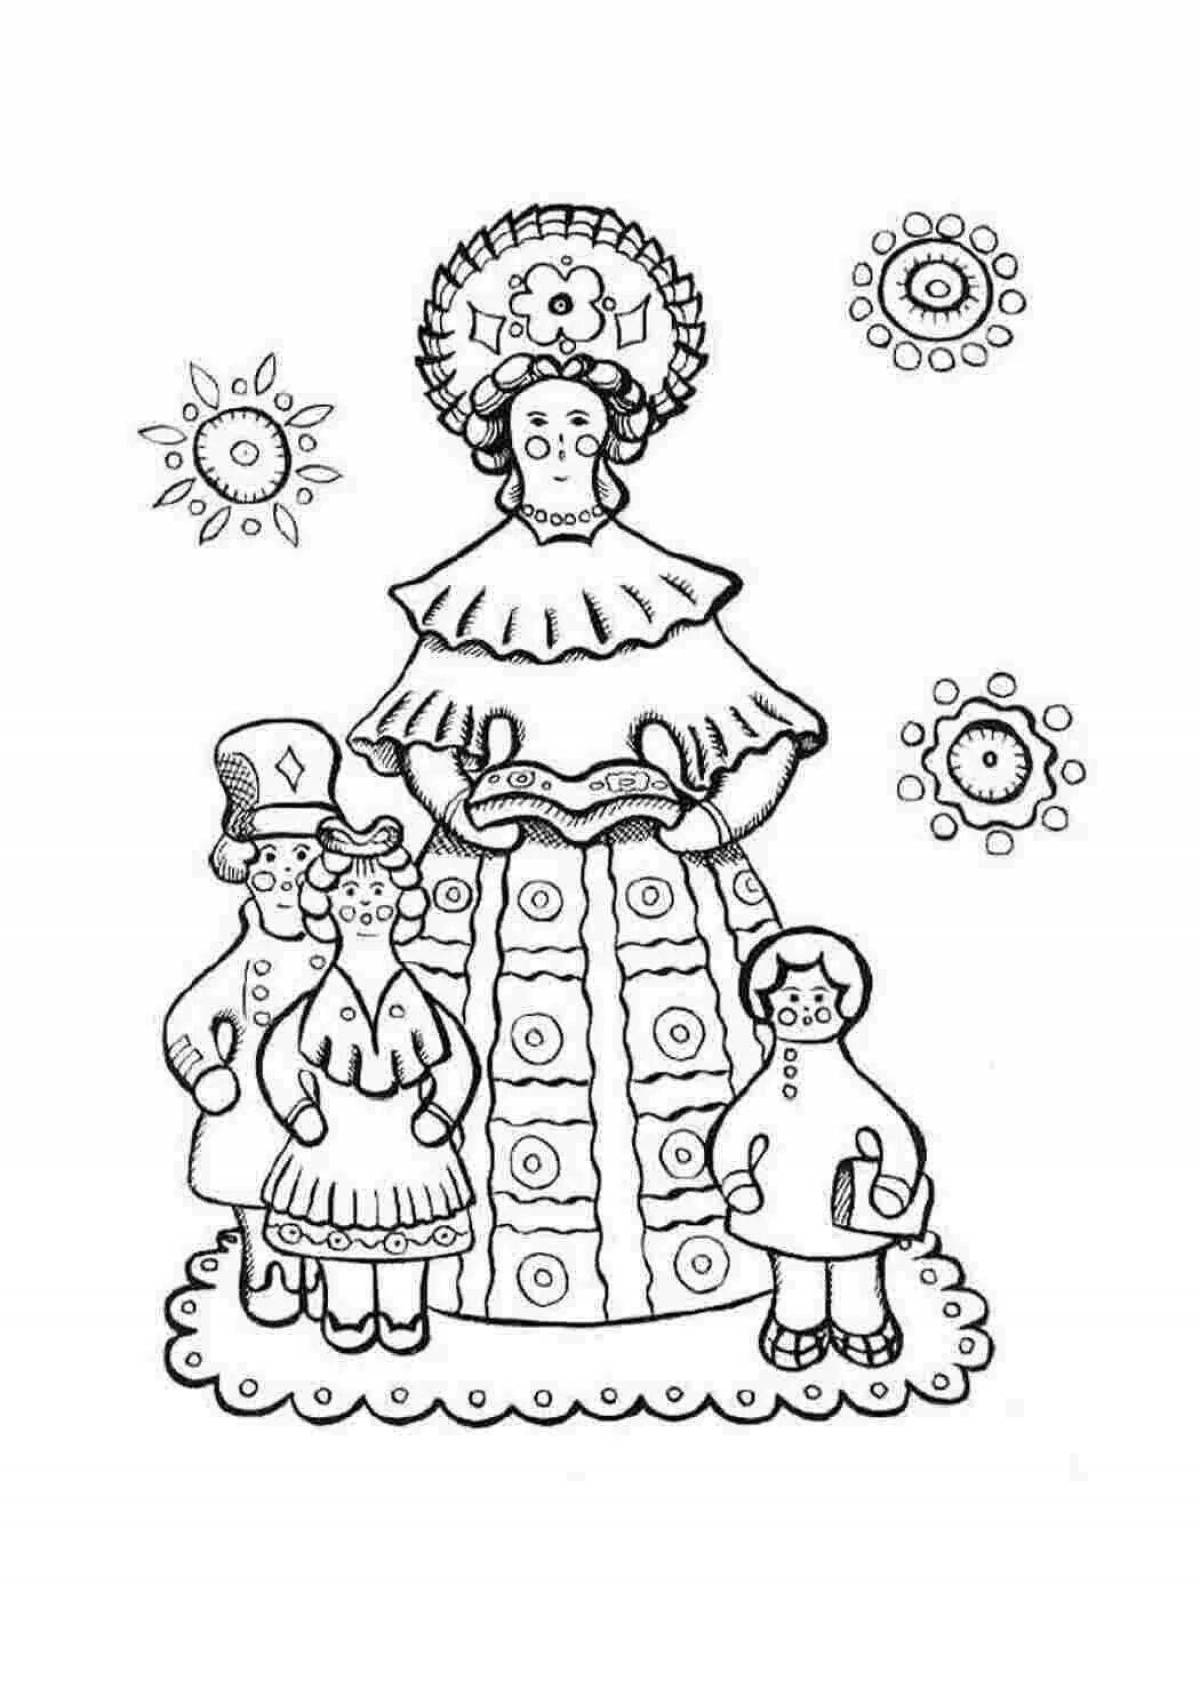 Coloring book glowing Dymkovo doll